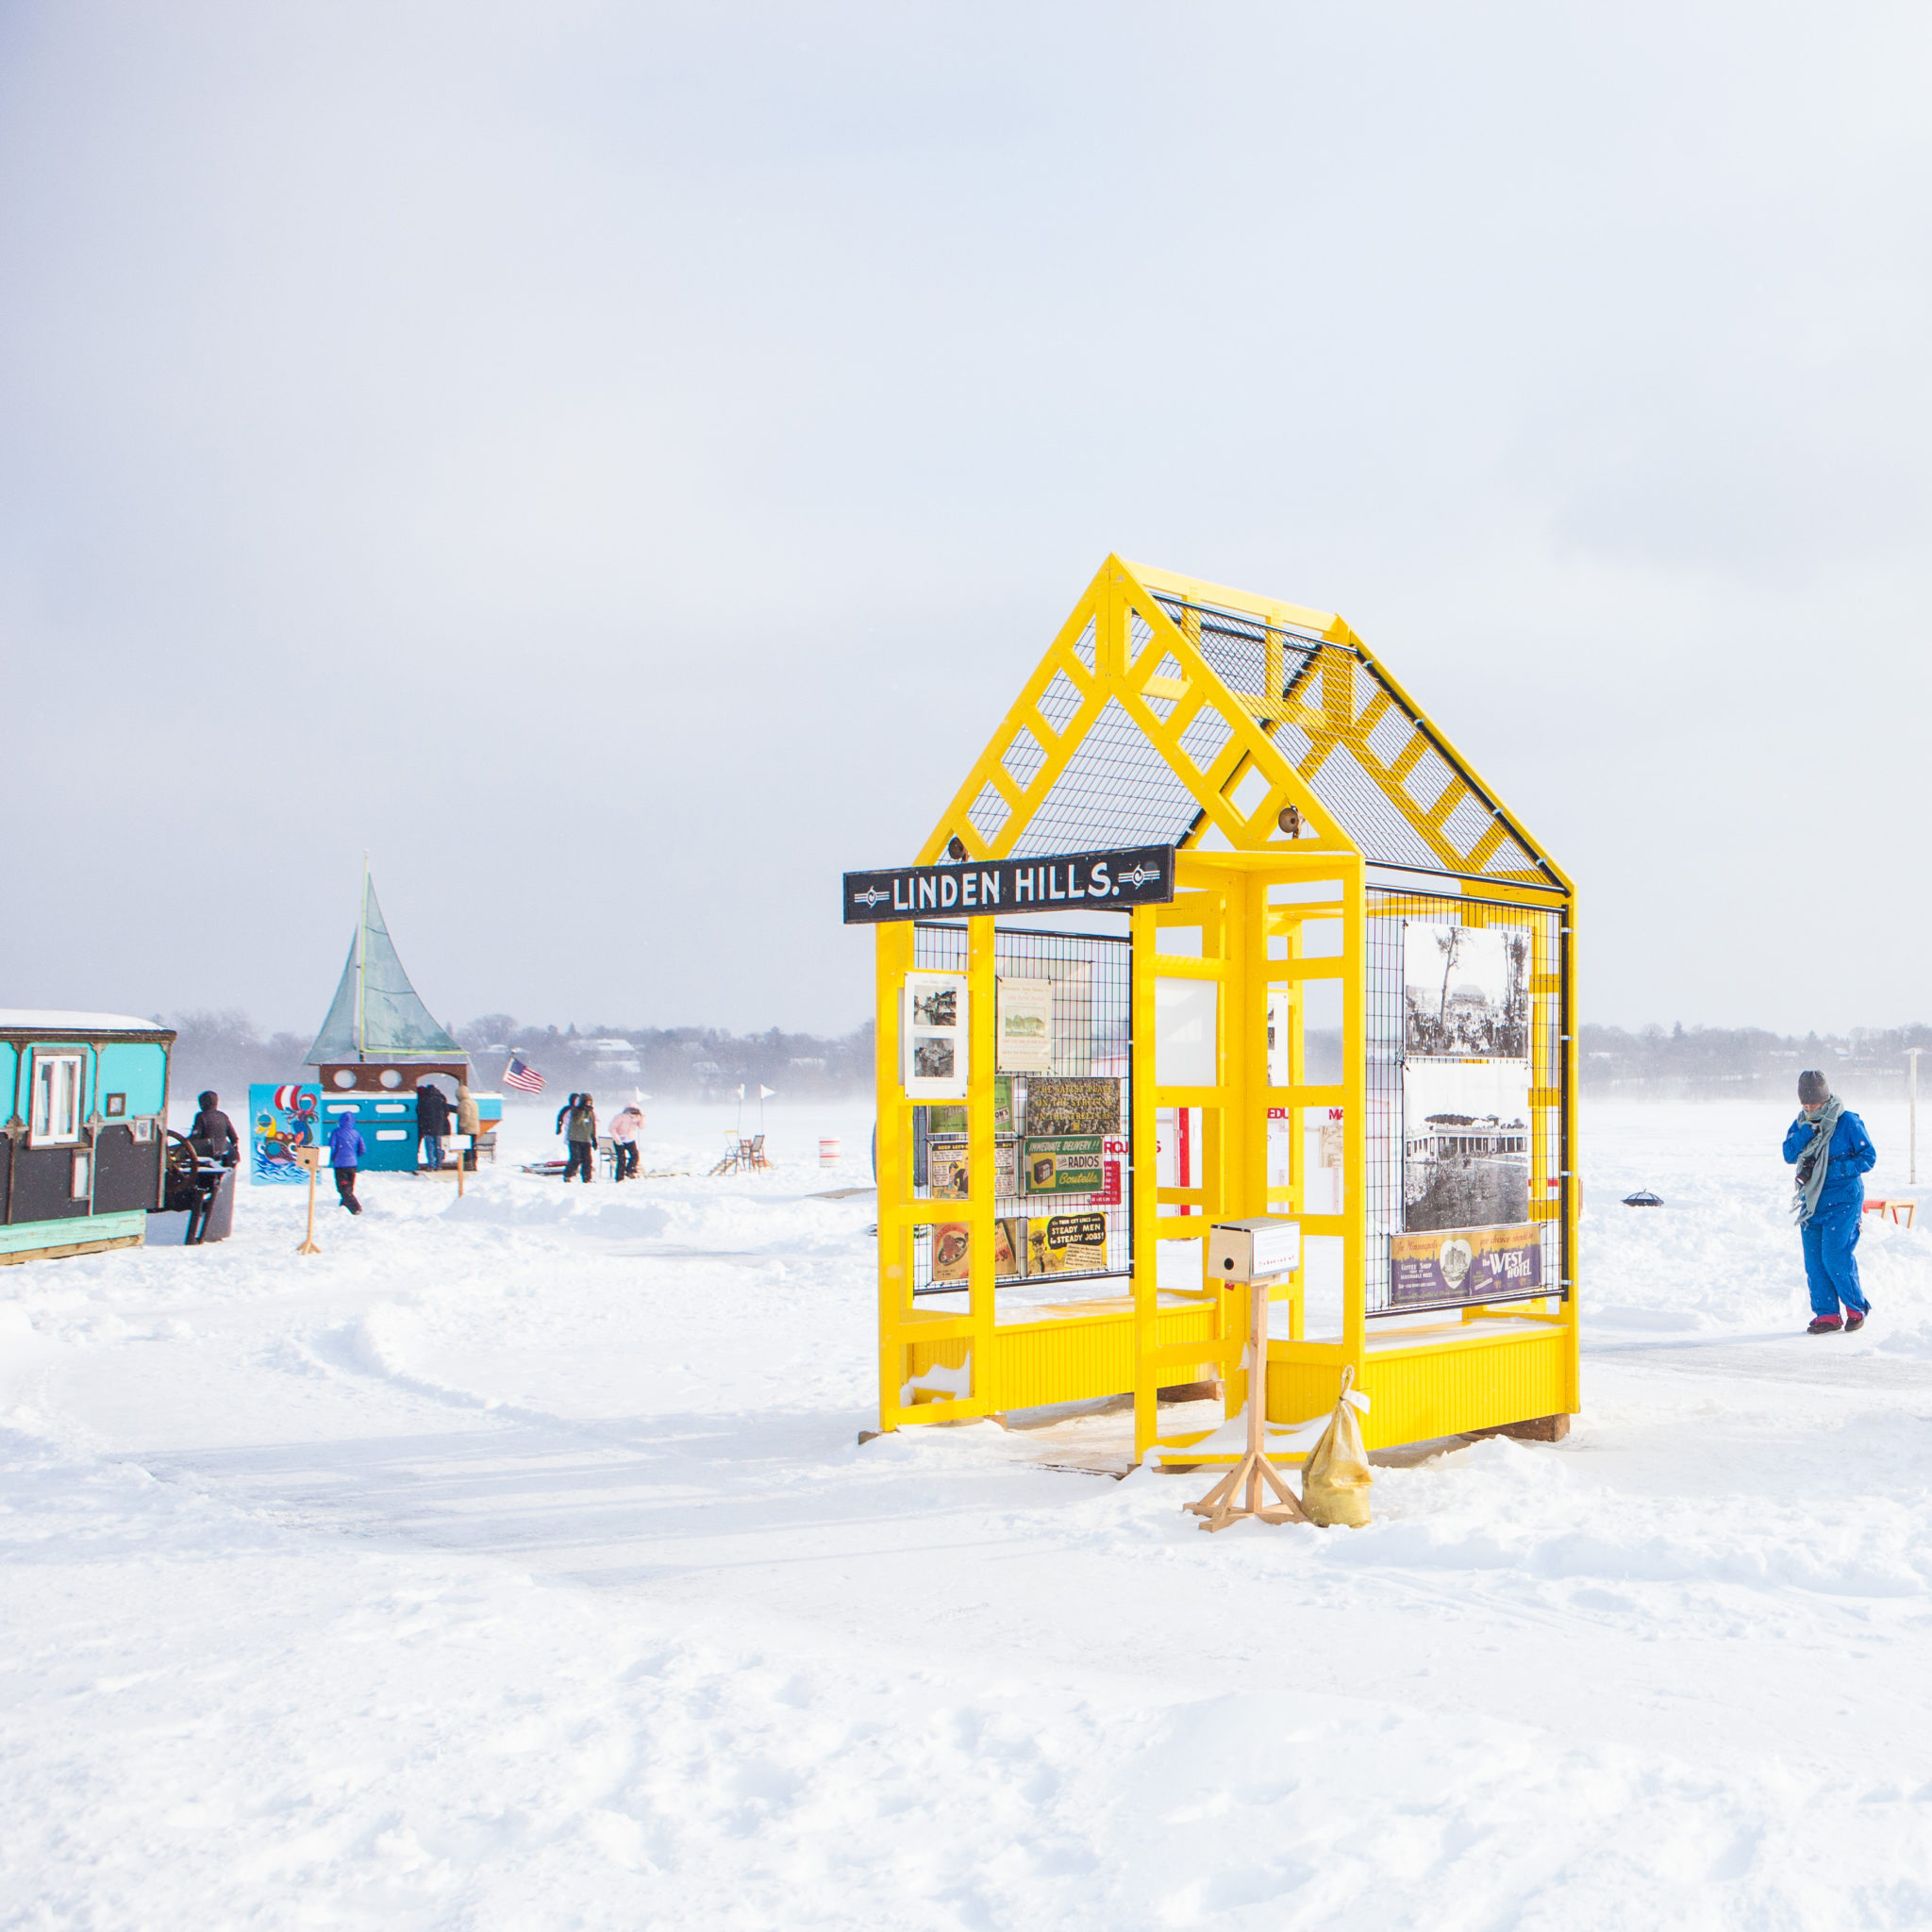 A yellow arched structure is featured in the shanty village on a snowy day